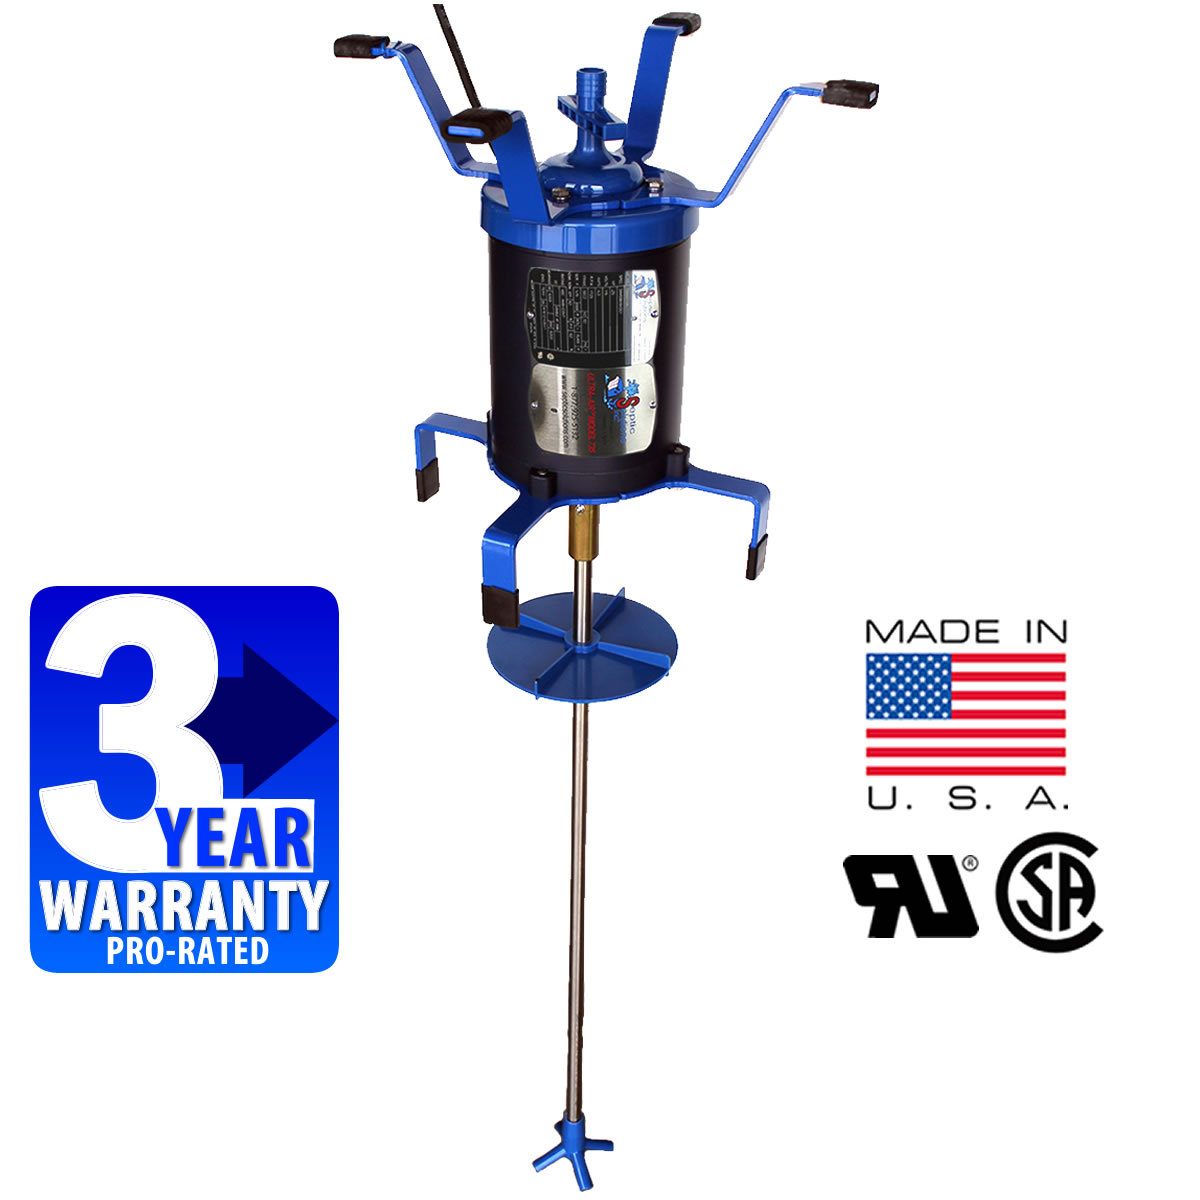 Ultra-Air Septic Tank Shaft Aerator with 14" Brackets - $475.00